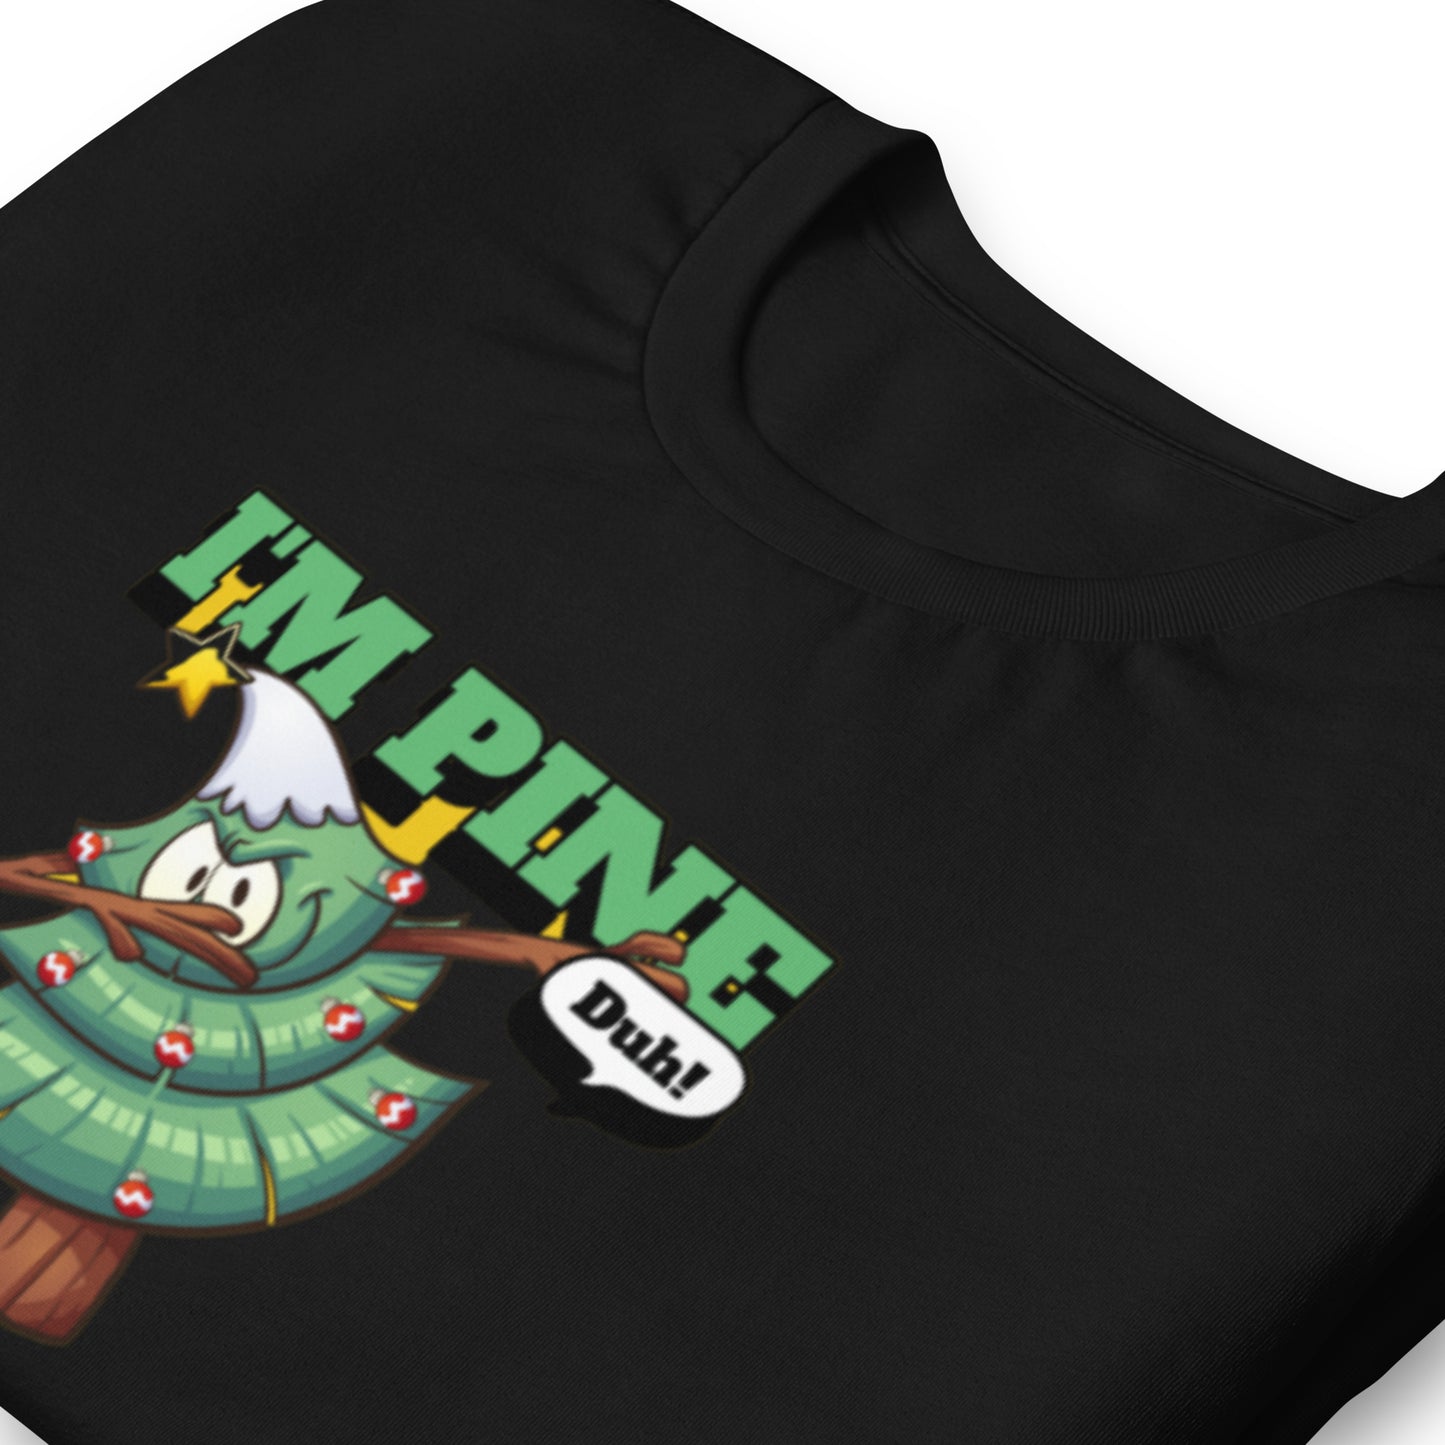 Holiday  T-shirt in I'm Pine